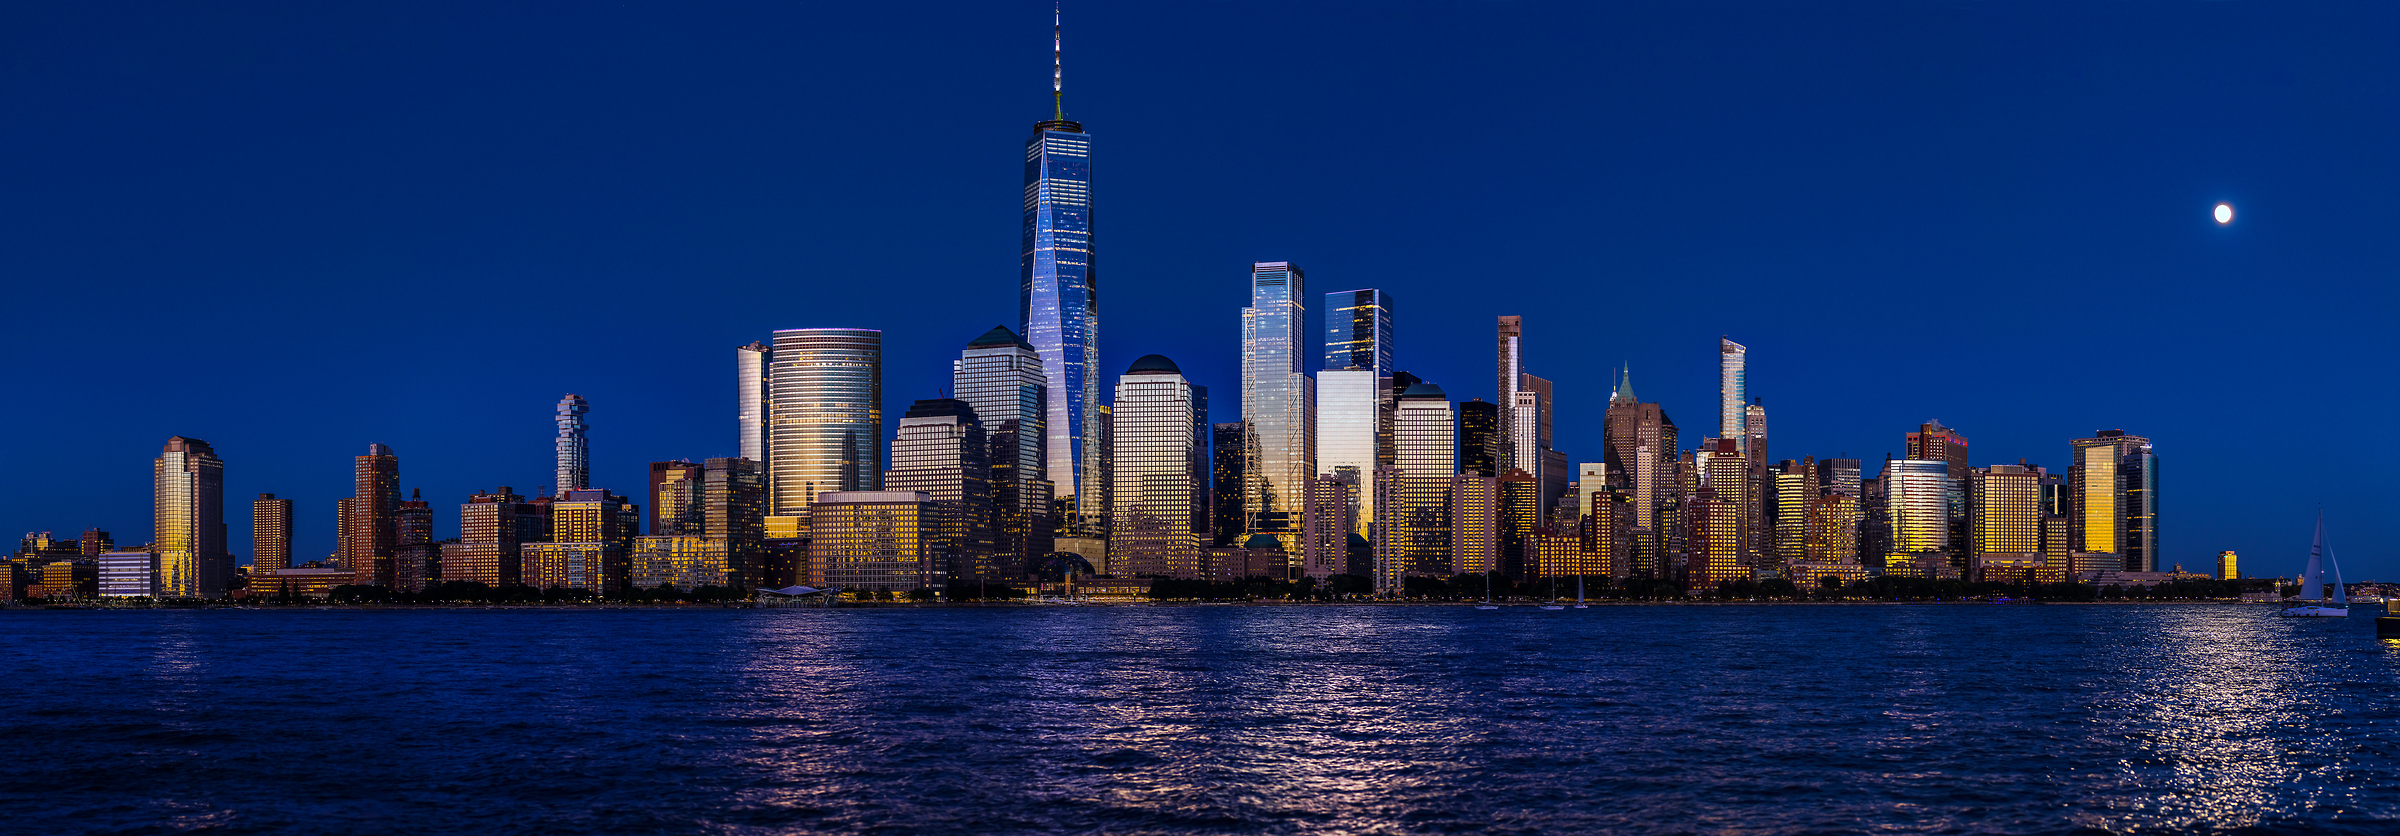 323 megapixels! A very high resolution, large-format VAST photo print of the Lower Manhattan skyline at sunset with a dark blue sky; cityscape photograph created by Beyti Barbaros in Lower Manhattan, New York City, New York.